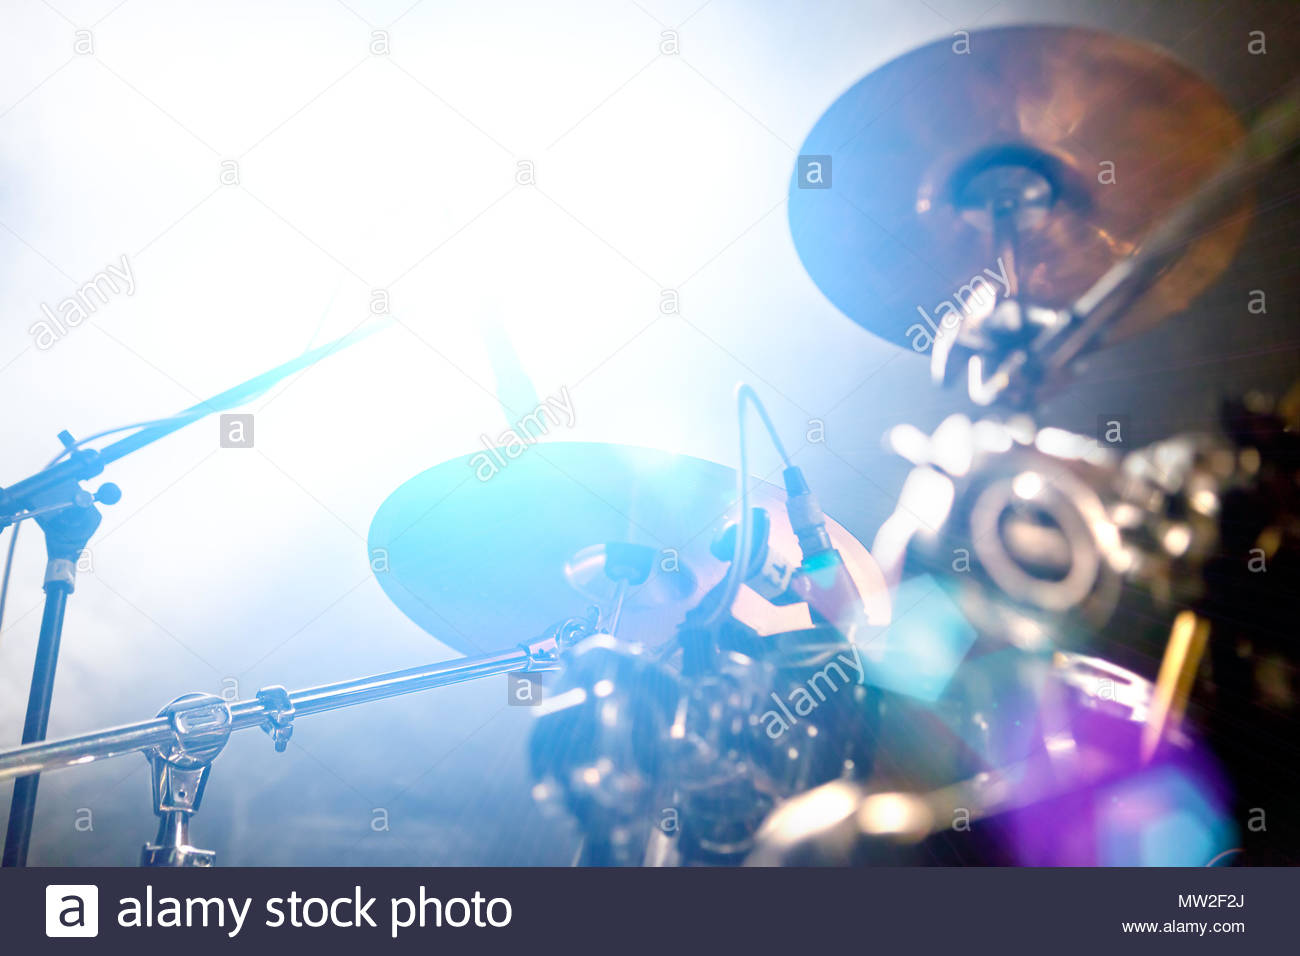 Live Music Background Concert And Band On Stage Drum Show